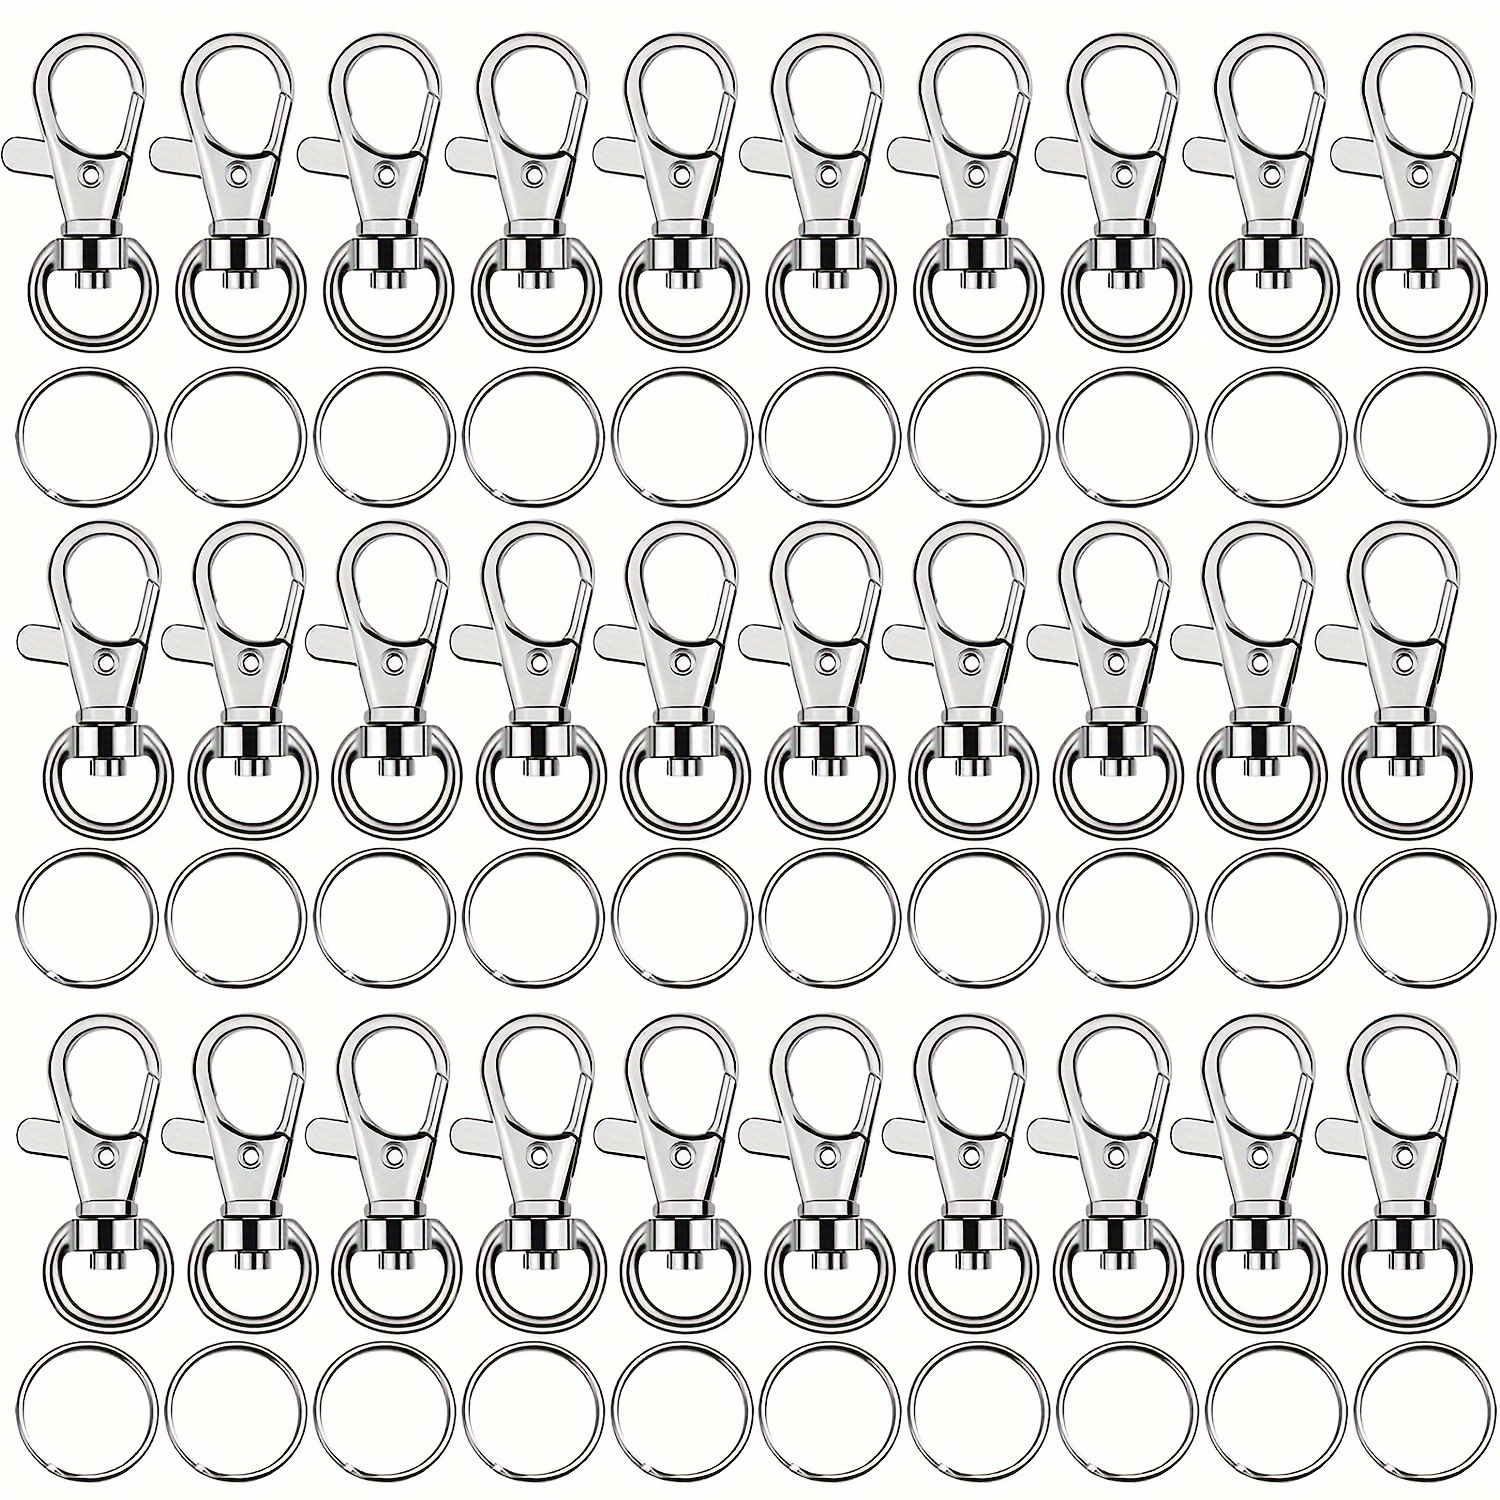 1, 10, 50 or 100 Premium Quality Alloy Lobster Claw Clasps Lanyard Key Ring  Crafts Badge Holder Jewelry Supply Ships From USA 